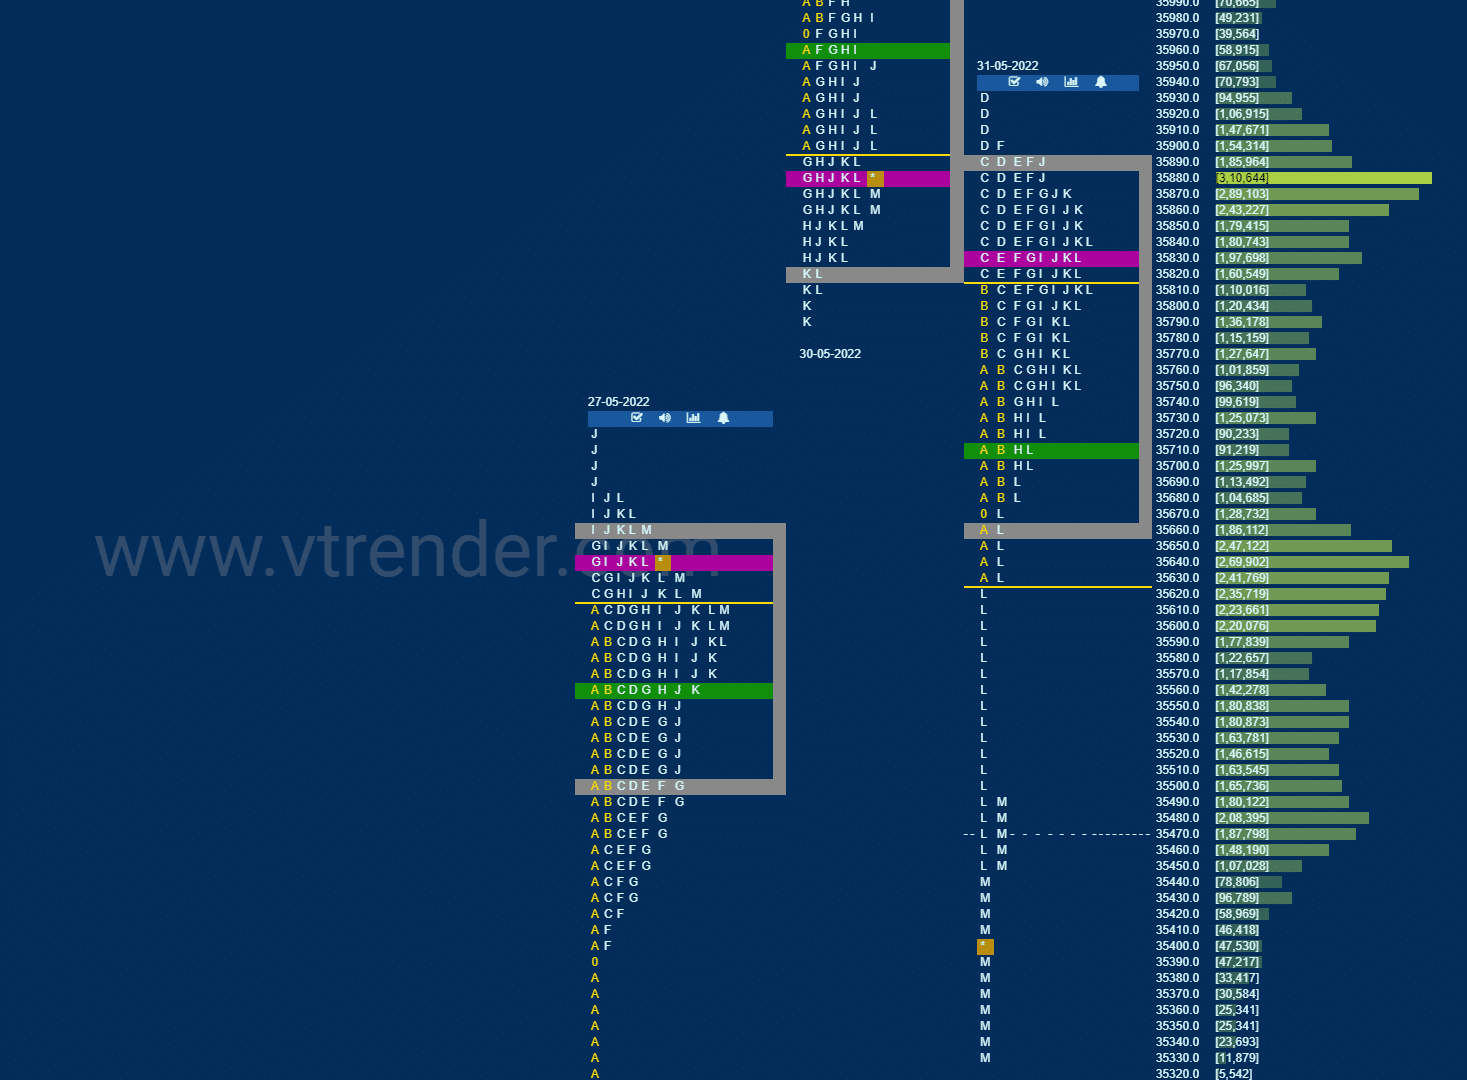 Bnf Market Profile Analysis Dated 31St May 2022 Banknifty Futures, Charts, Day Trading, Intraday Trading, Intraday Trading Strategies, Market Profile, Market Profile Trading Strategies, Nifty Futures, Order Flow Analysis, Support And Resistance, Technical Analysis, Trading Strategies, Volume Profile Trading